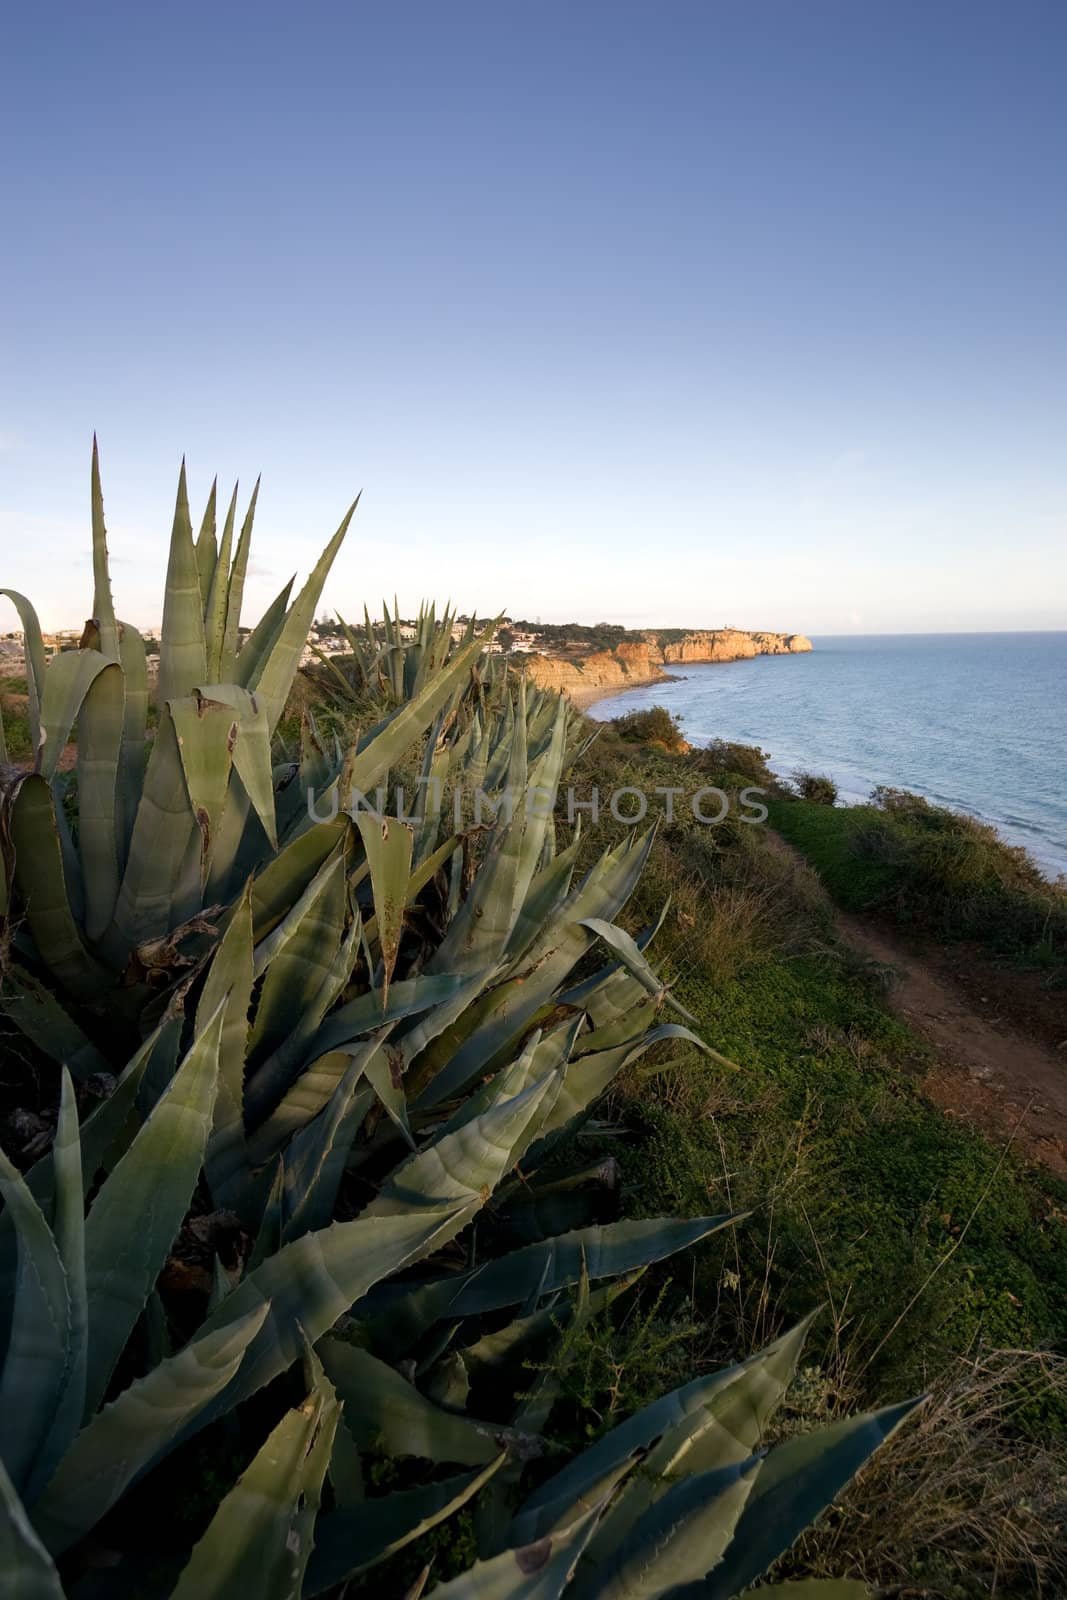 Prickly Aloe Plant with a view of the ocean by woodygraphs